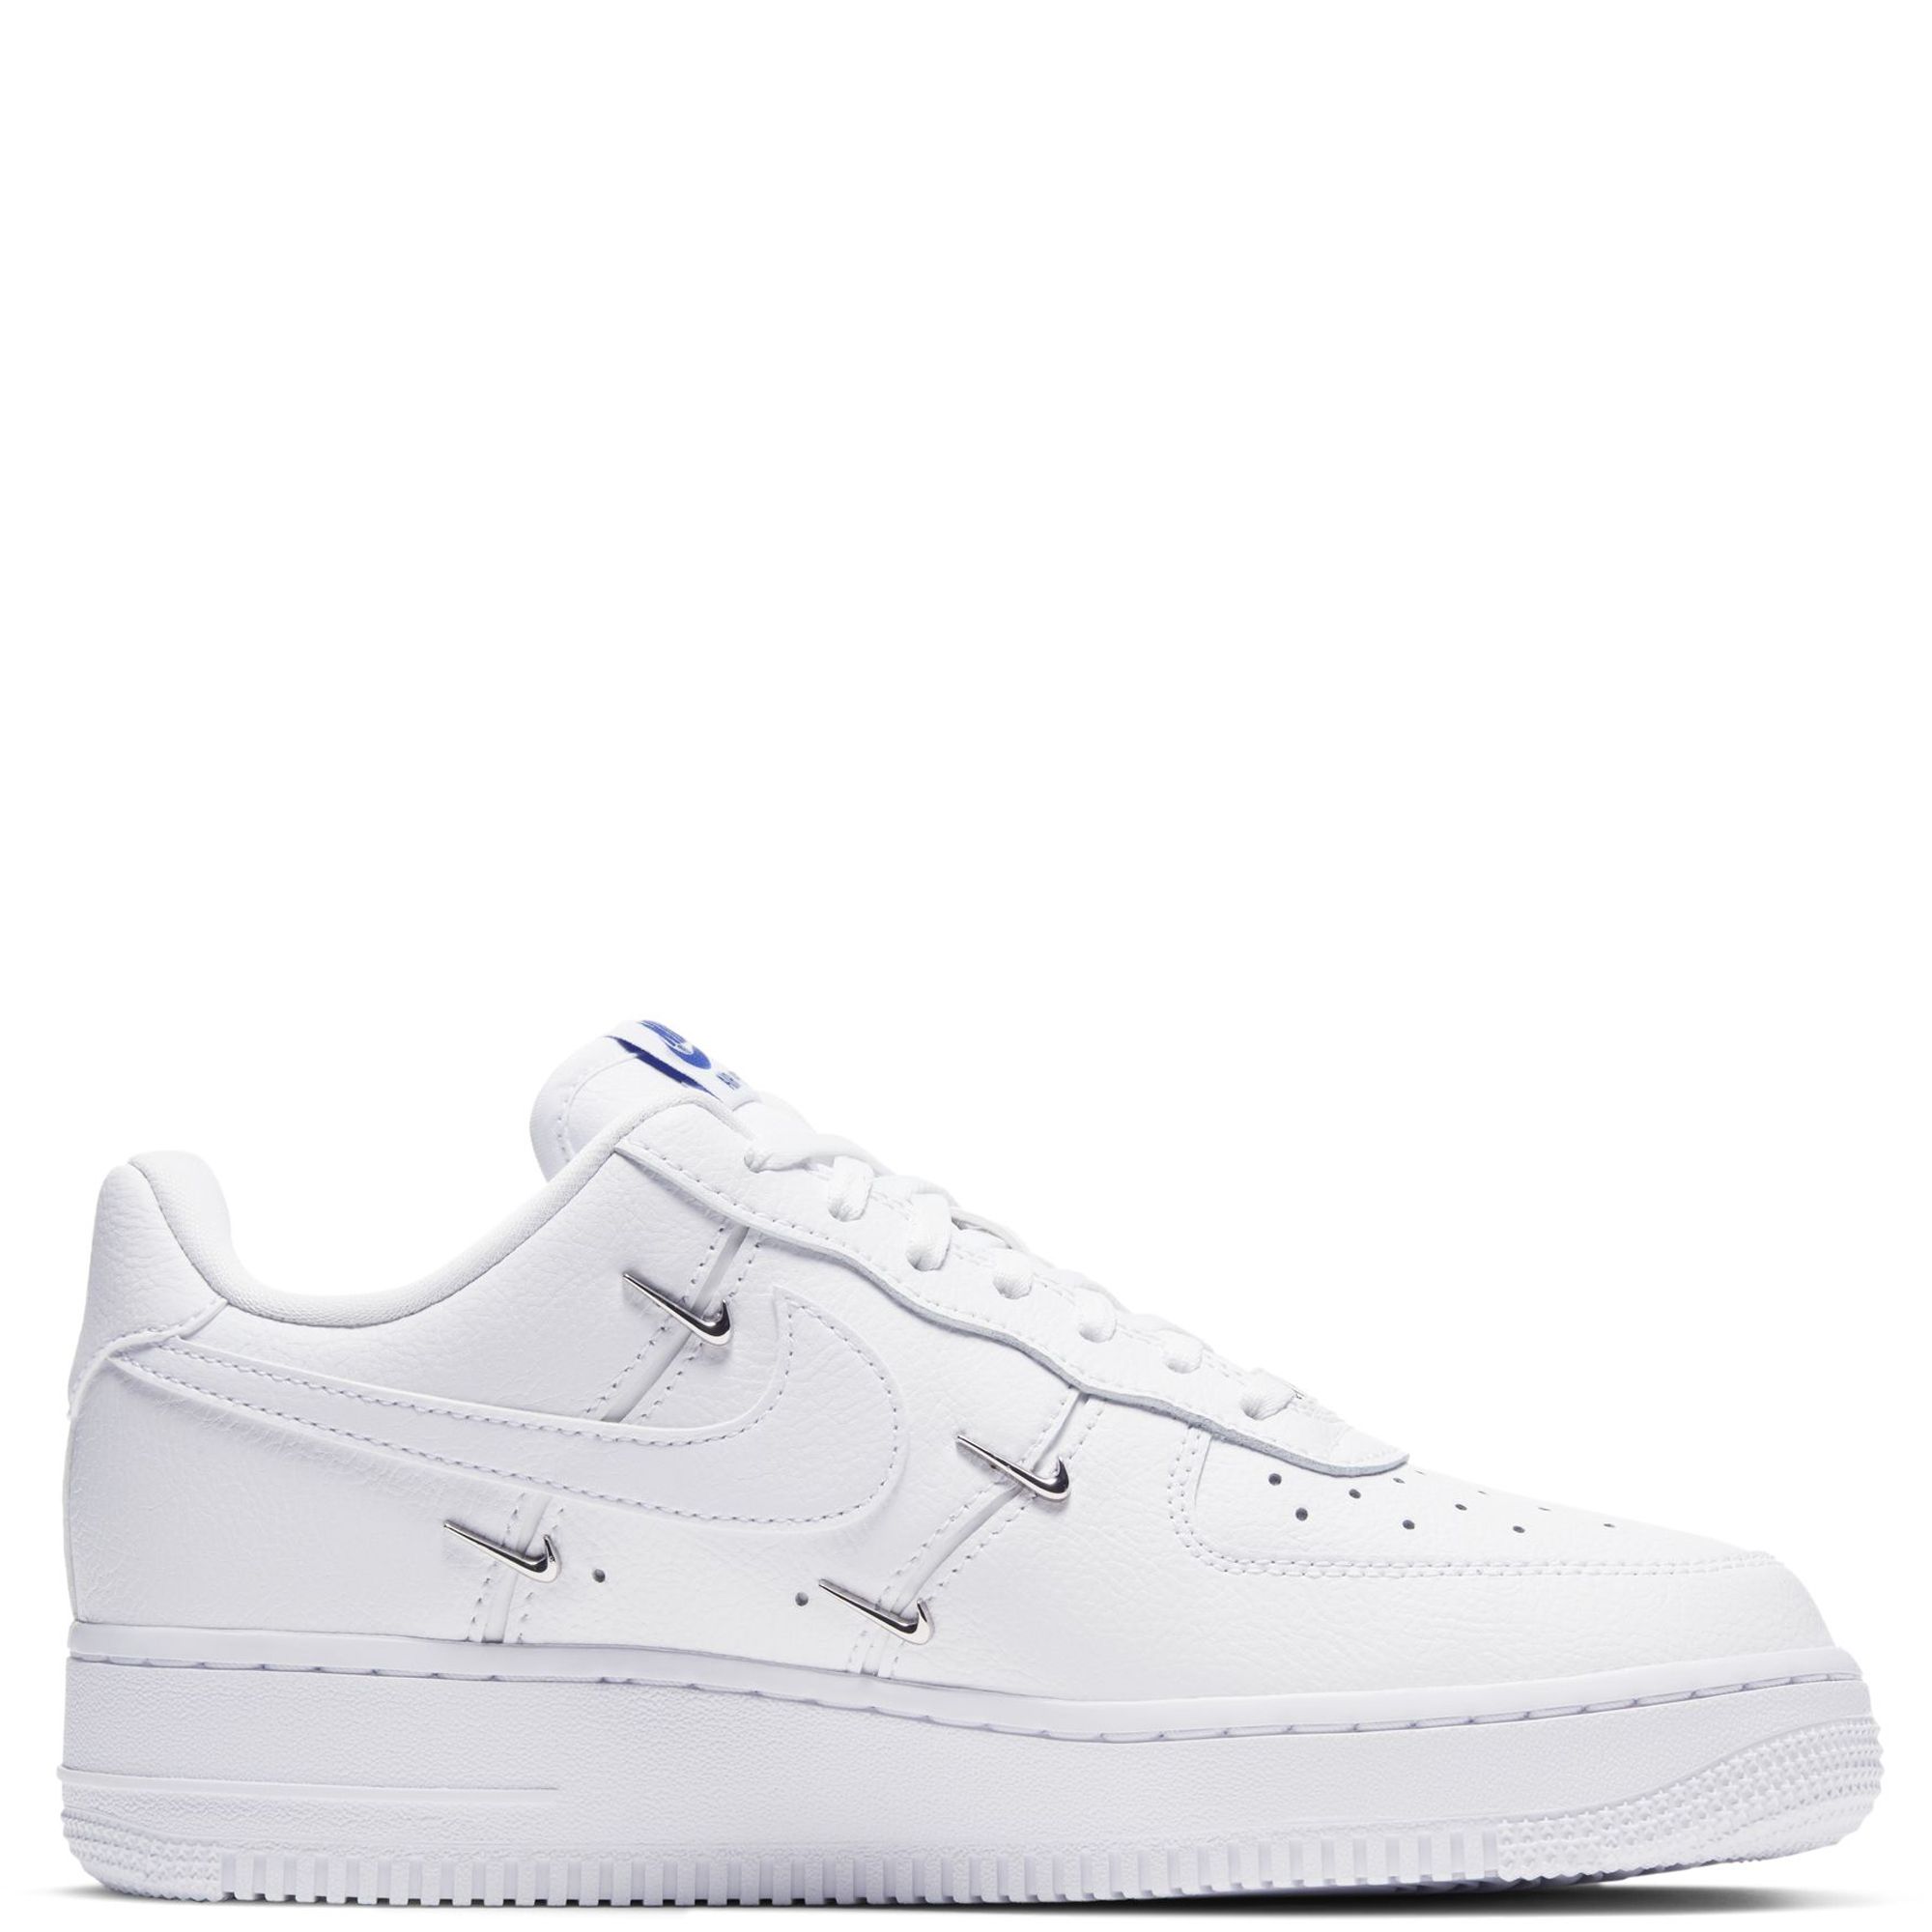 Nike Air Force 1 '07 Women's Sneakers White CT1990-100